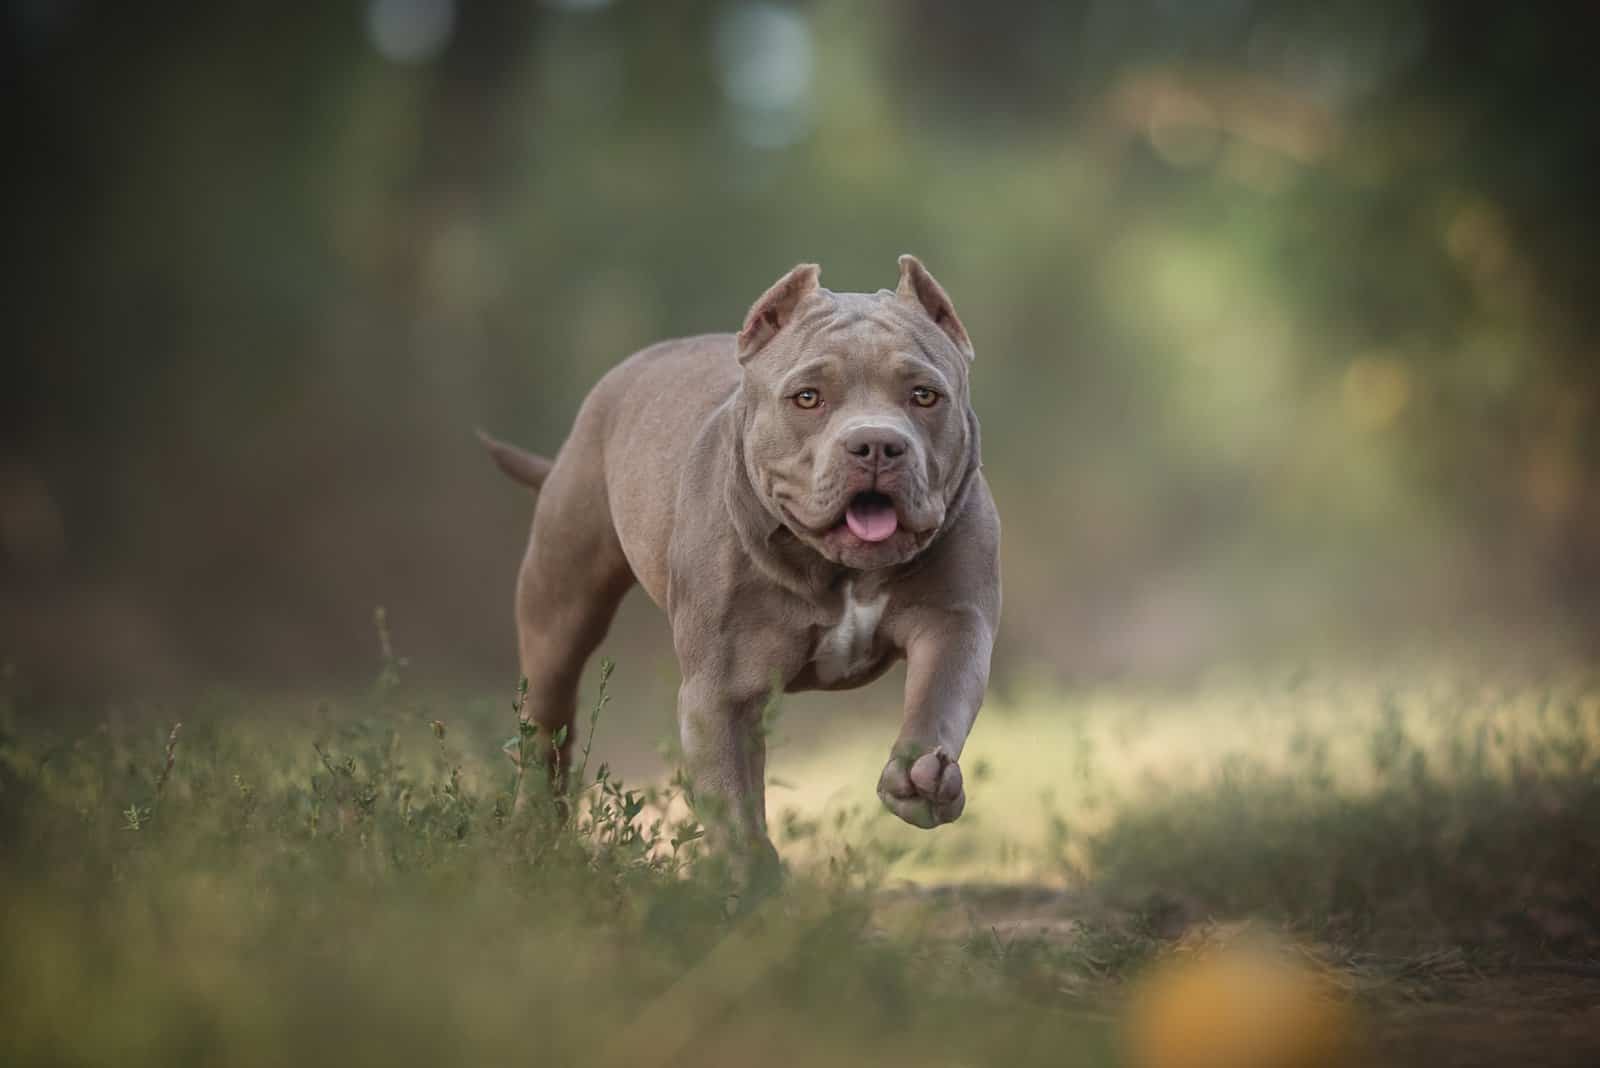 Pocket American Bully Puppies for Sale, Top American Bully Breeders